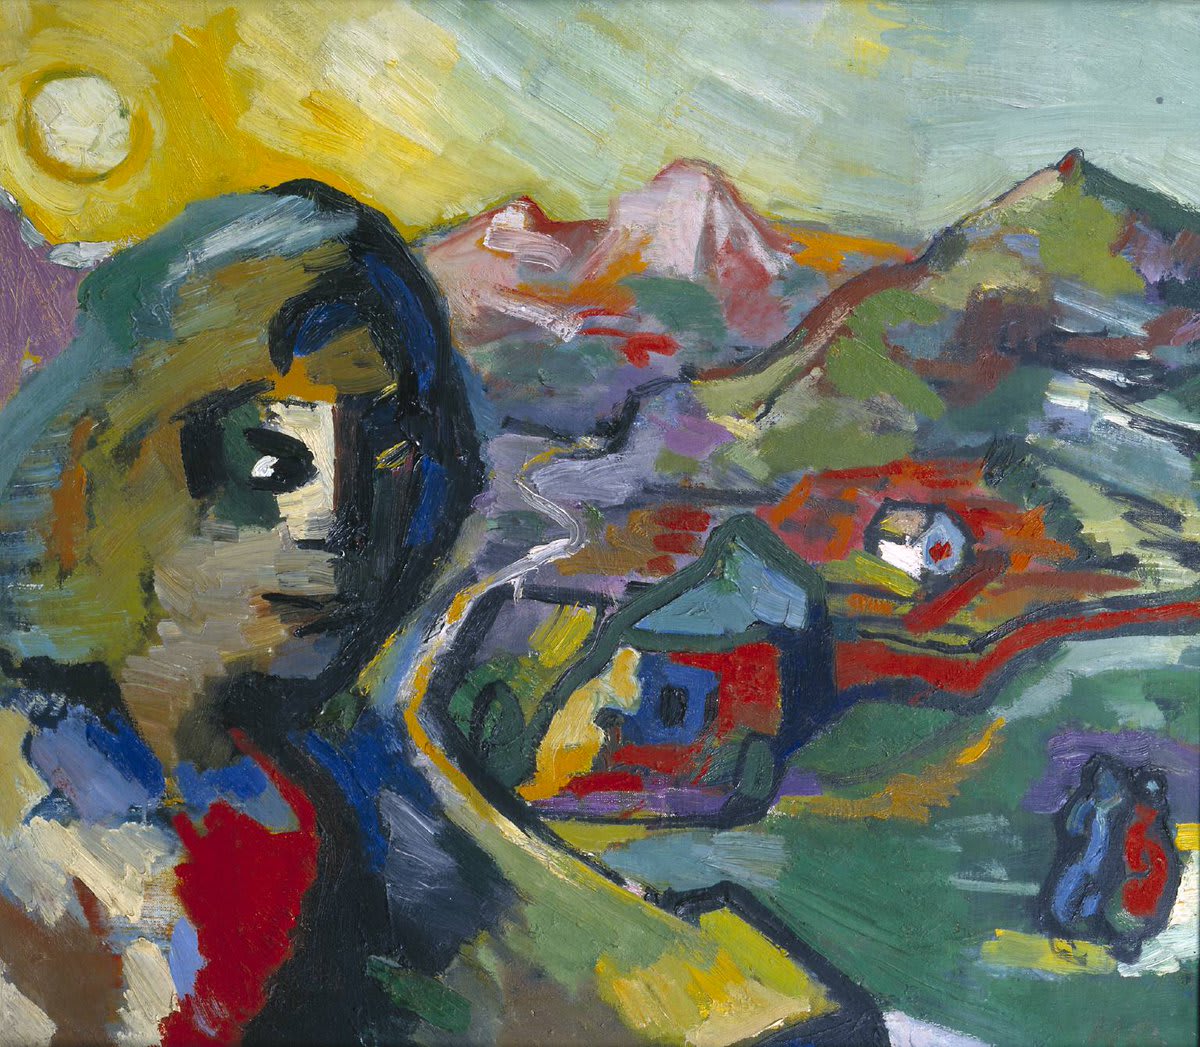 Hilde Goldschmidt’s 'Sphinx' shows the artist in the Lake District, where she moved to from Austria in 1939. She found an artistic community, including fellow refugees. She painted this portrait to recall a moment of happiness. 💜